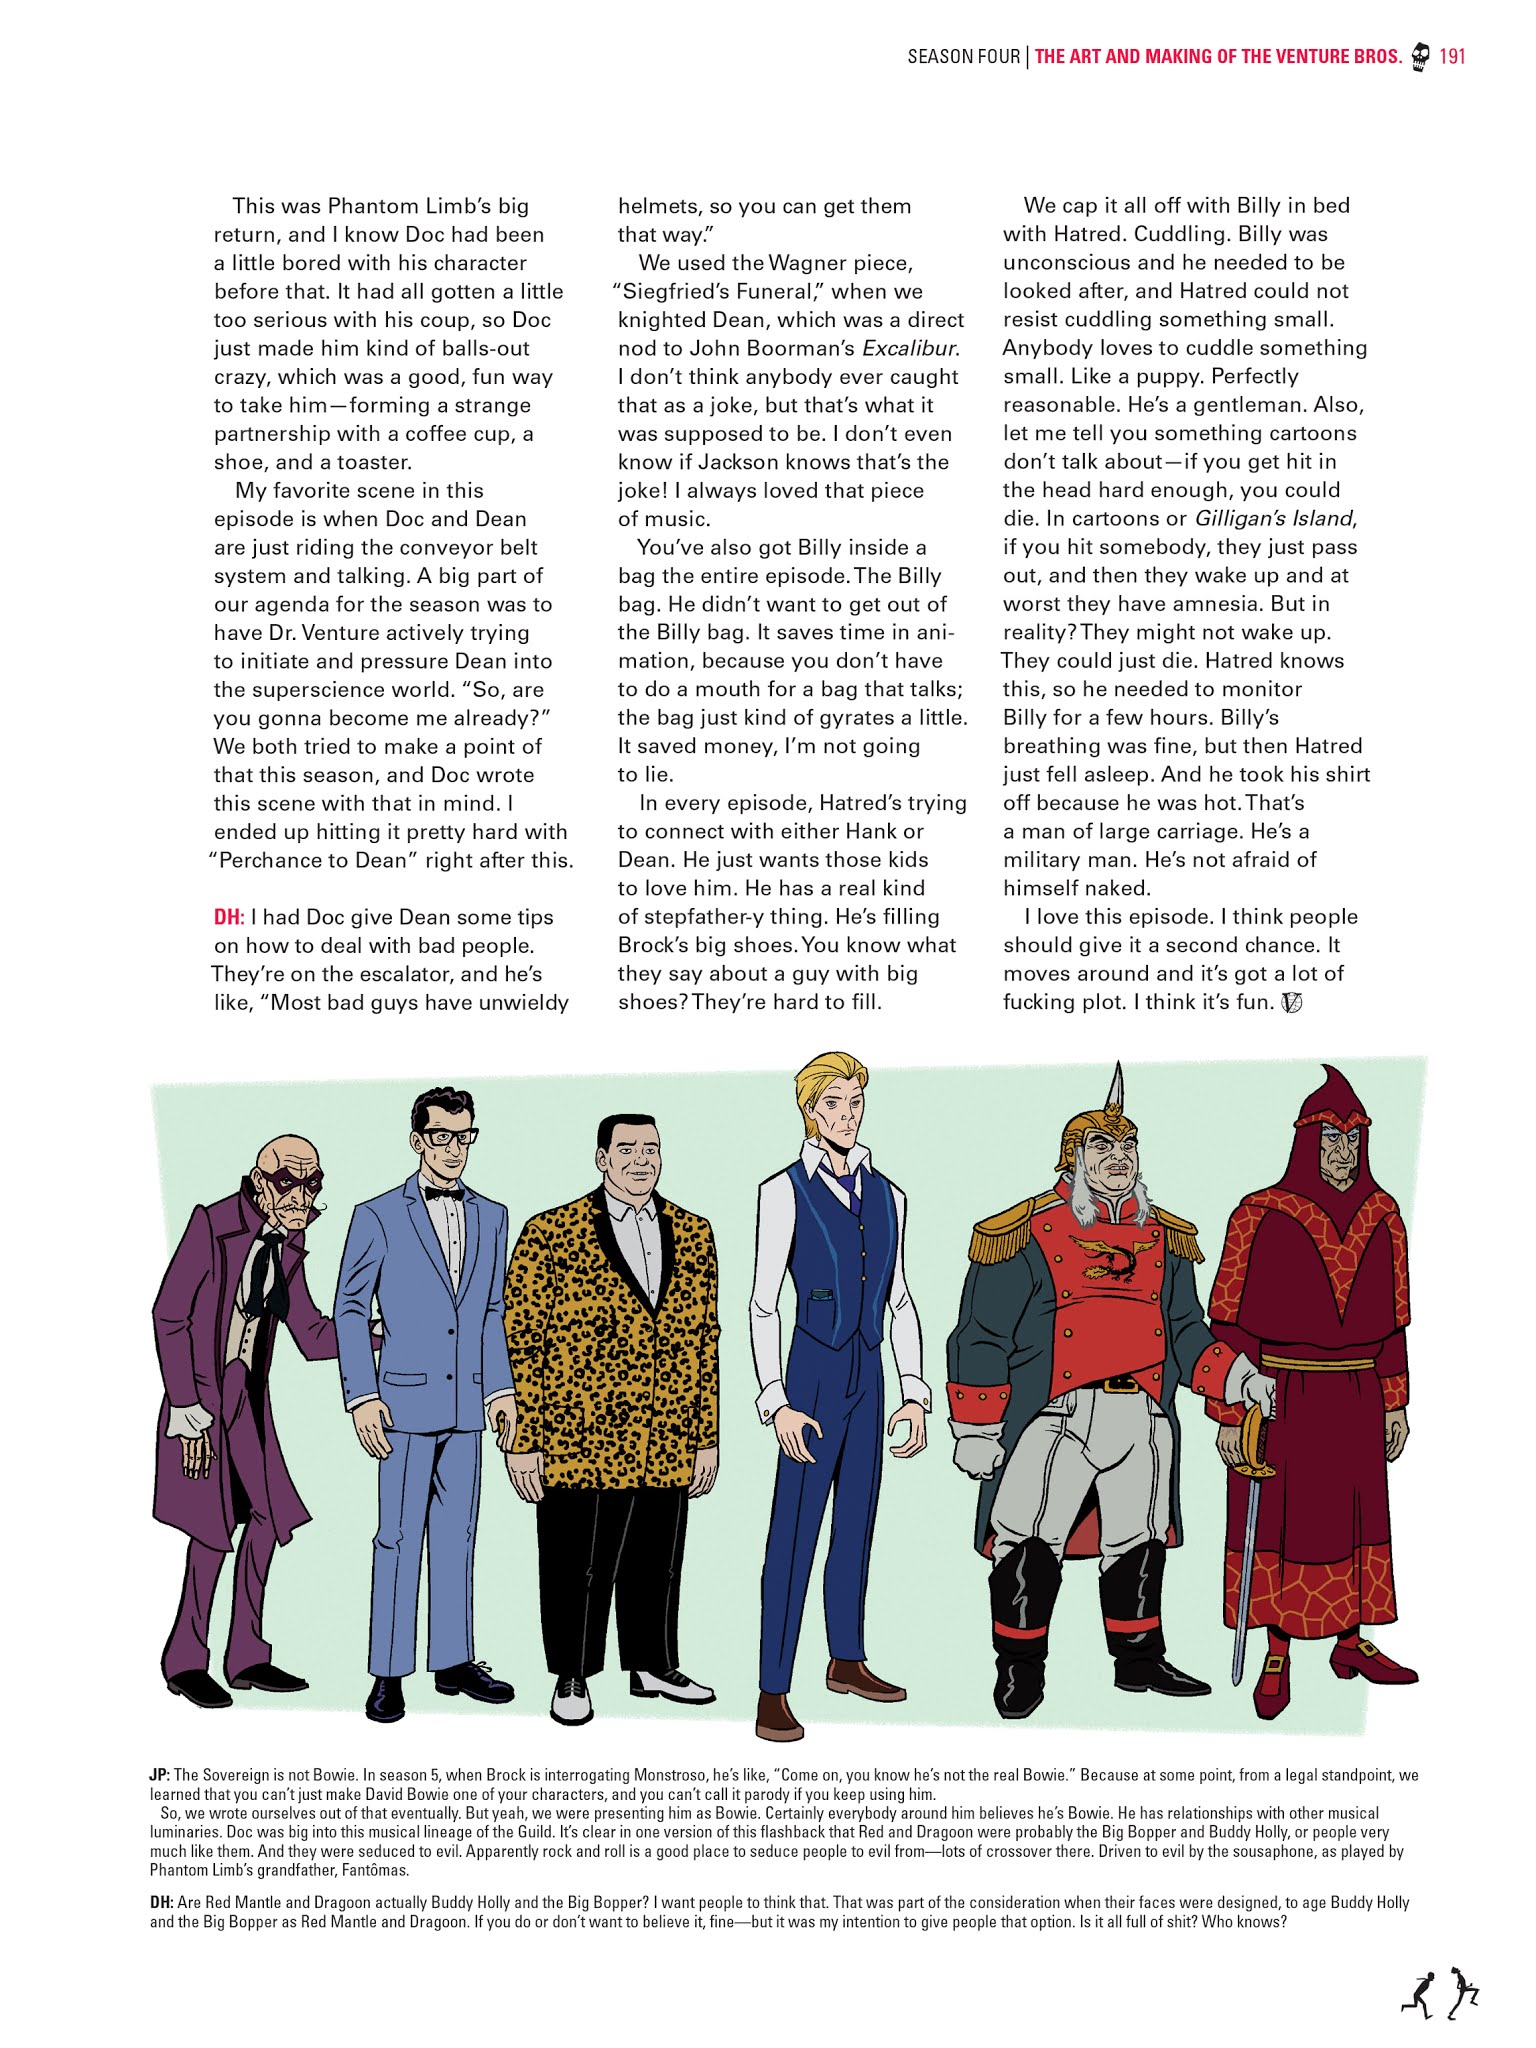 Read online Go Team Venture!: The Art and Making of The Venture Bros. comic -  Issue # TPB (Part 2) - 90